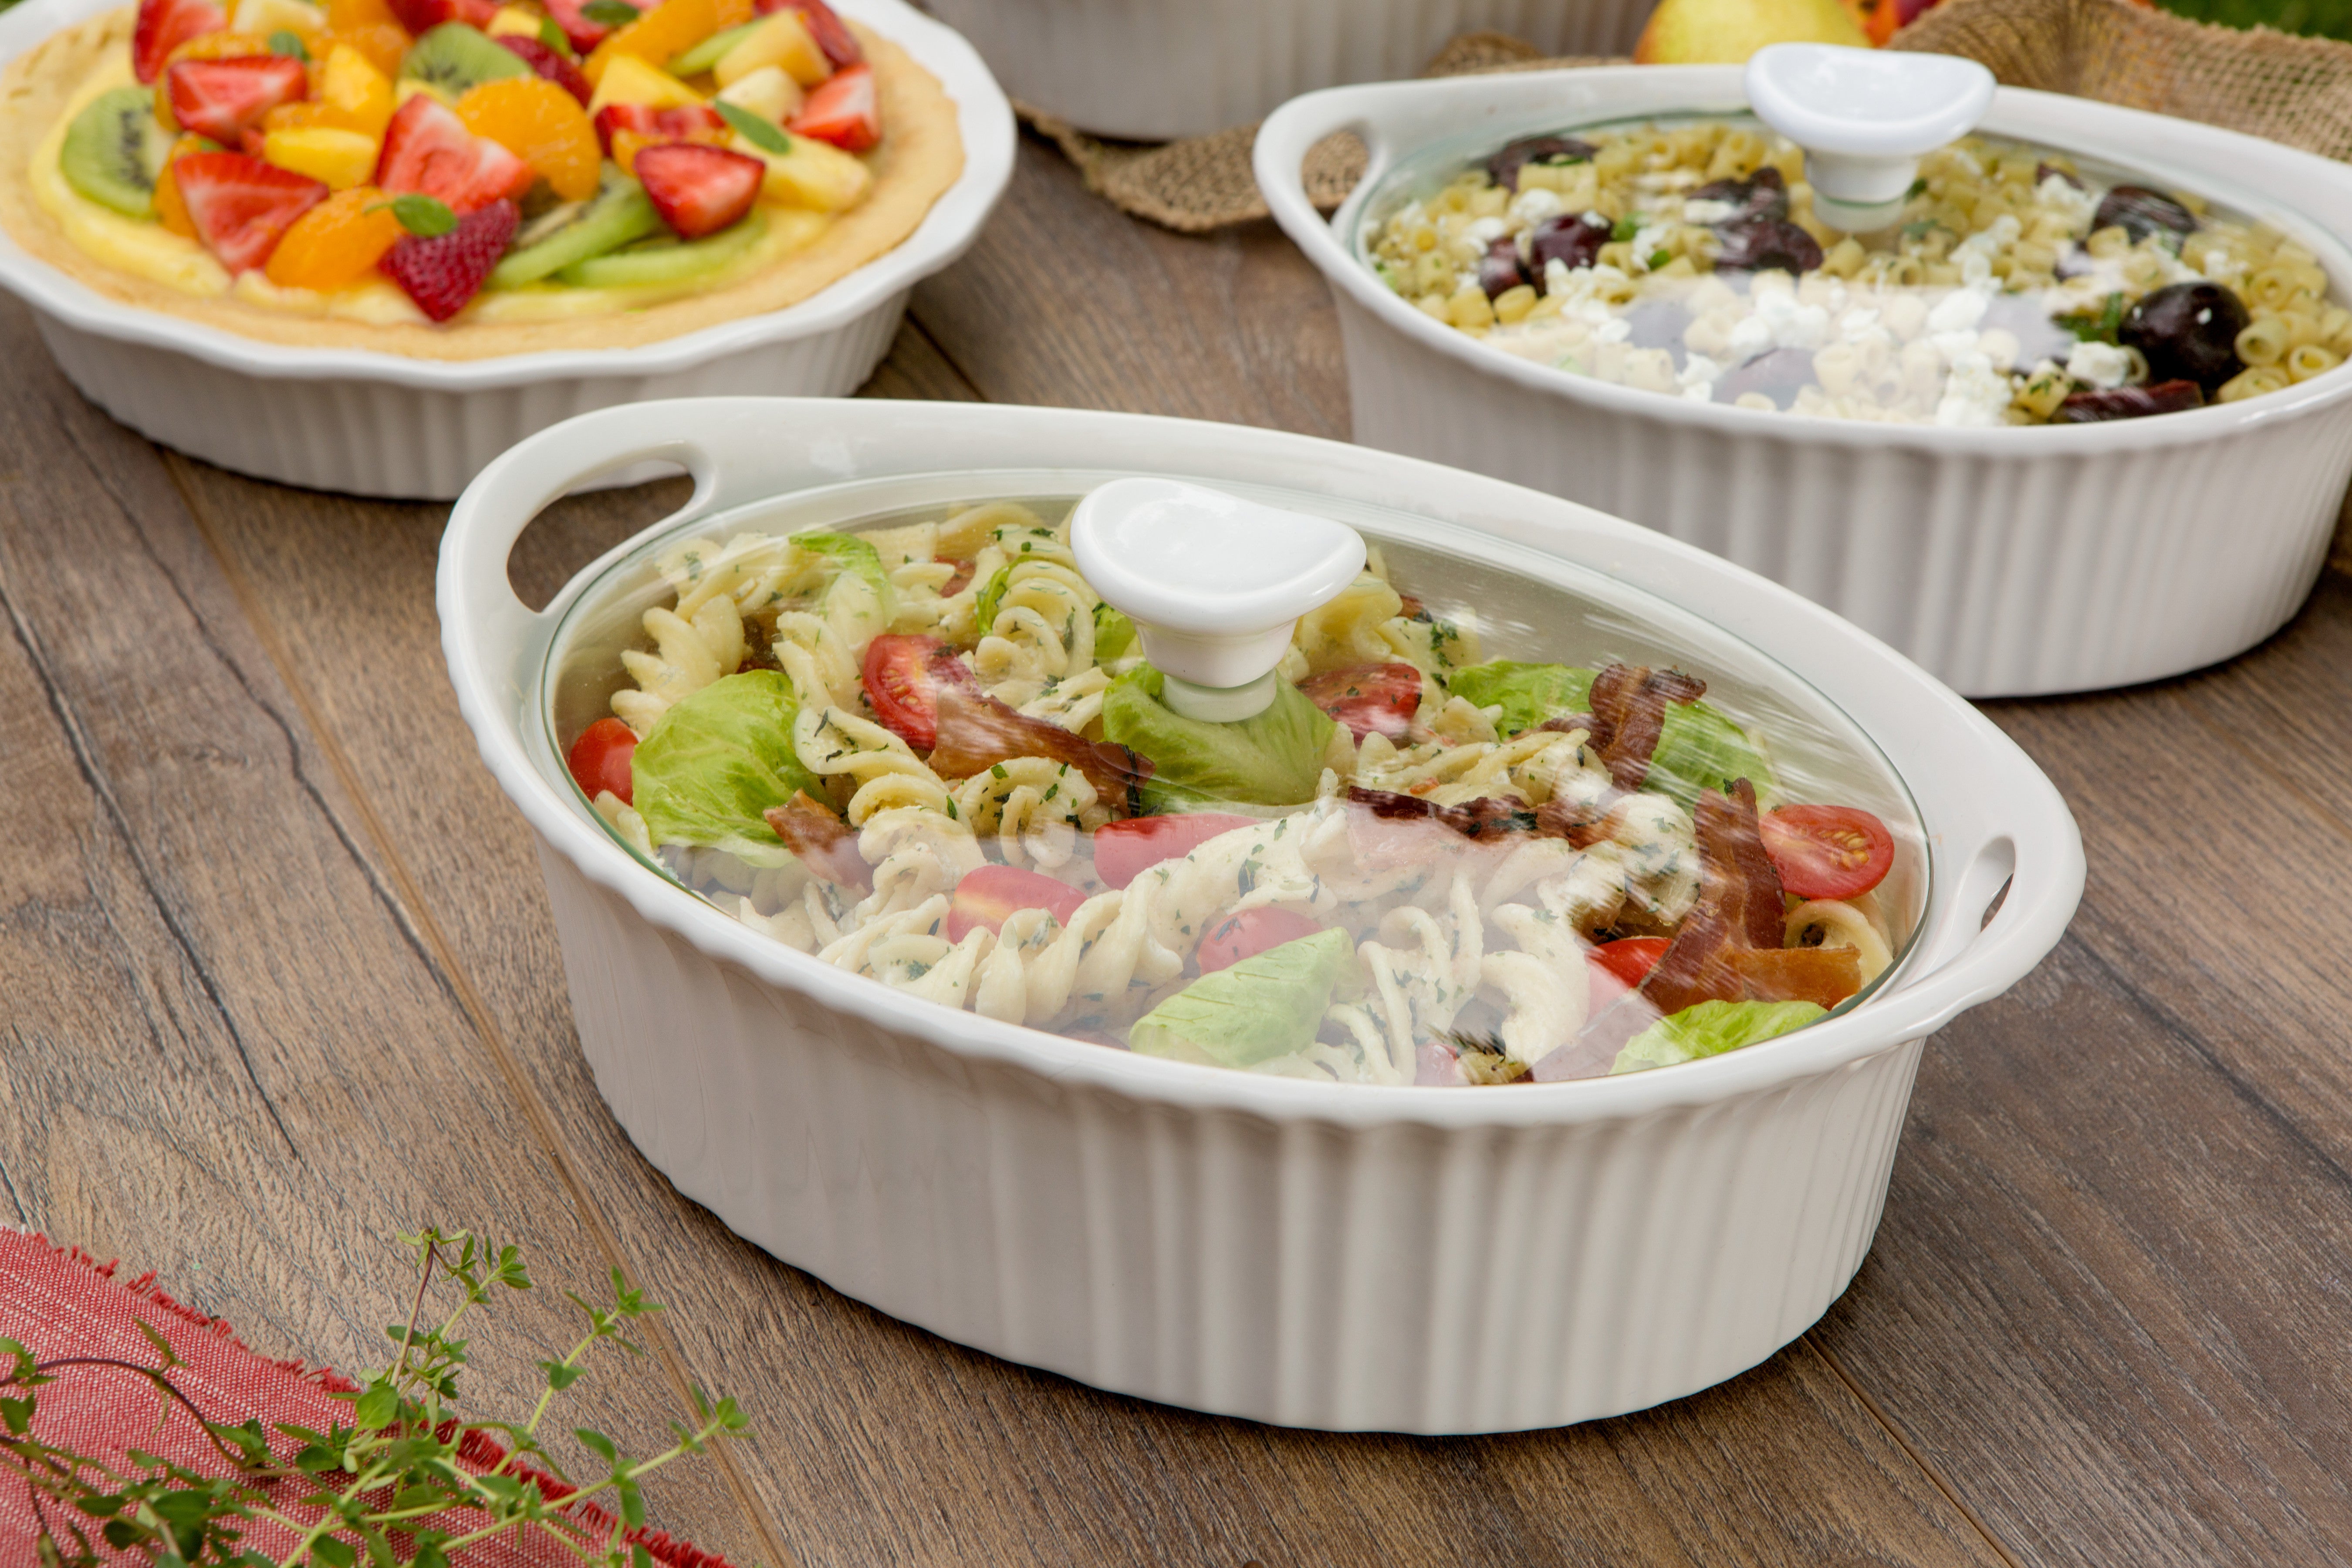 Corningware® French White 2.35L Oval Covered Casserole